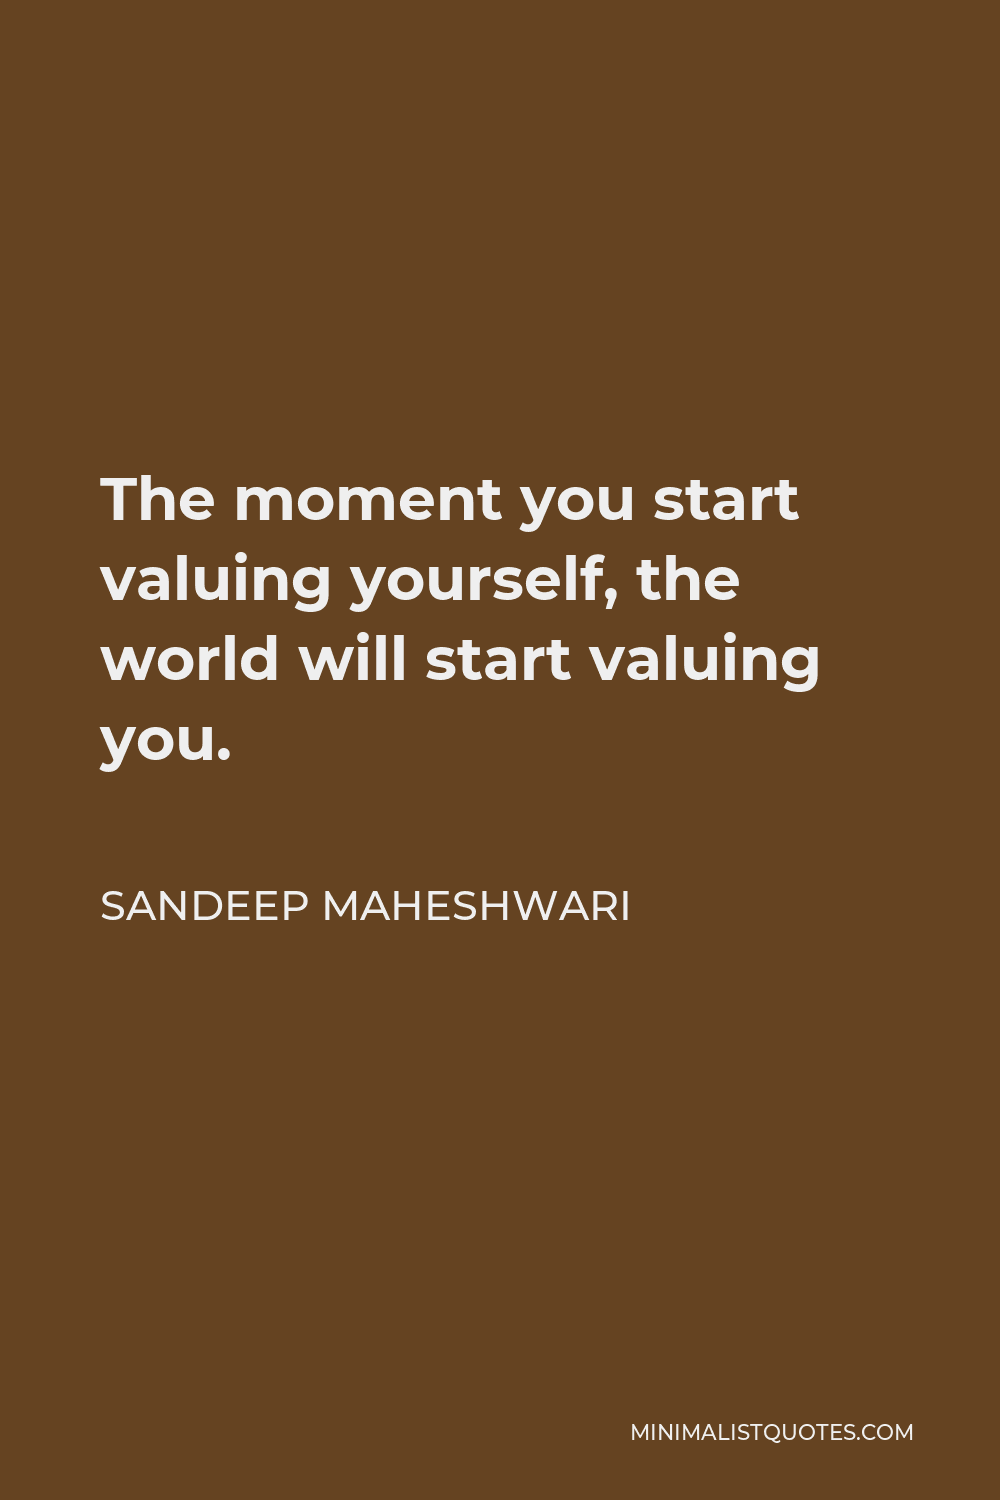 Sandeep Maheshwari Quote - The moment you start valuing yourself, the world will start valuing you.